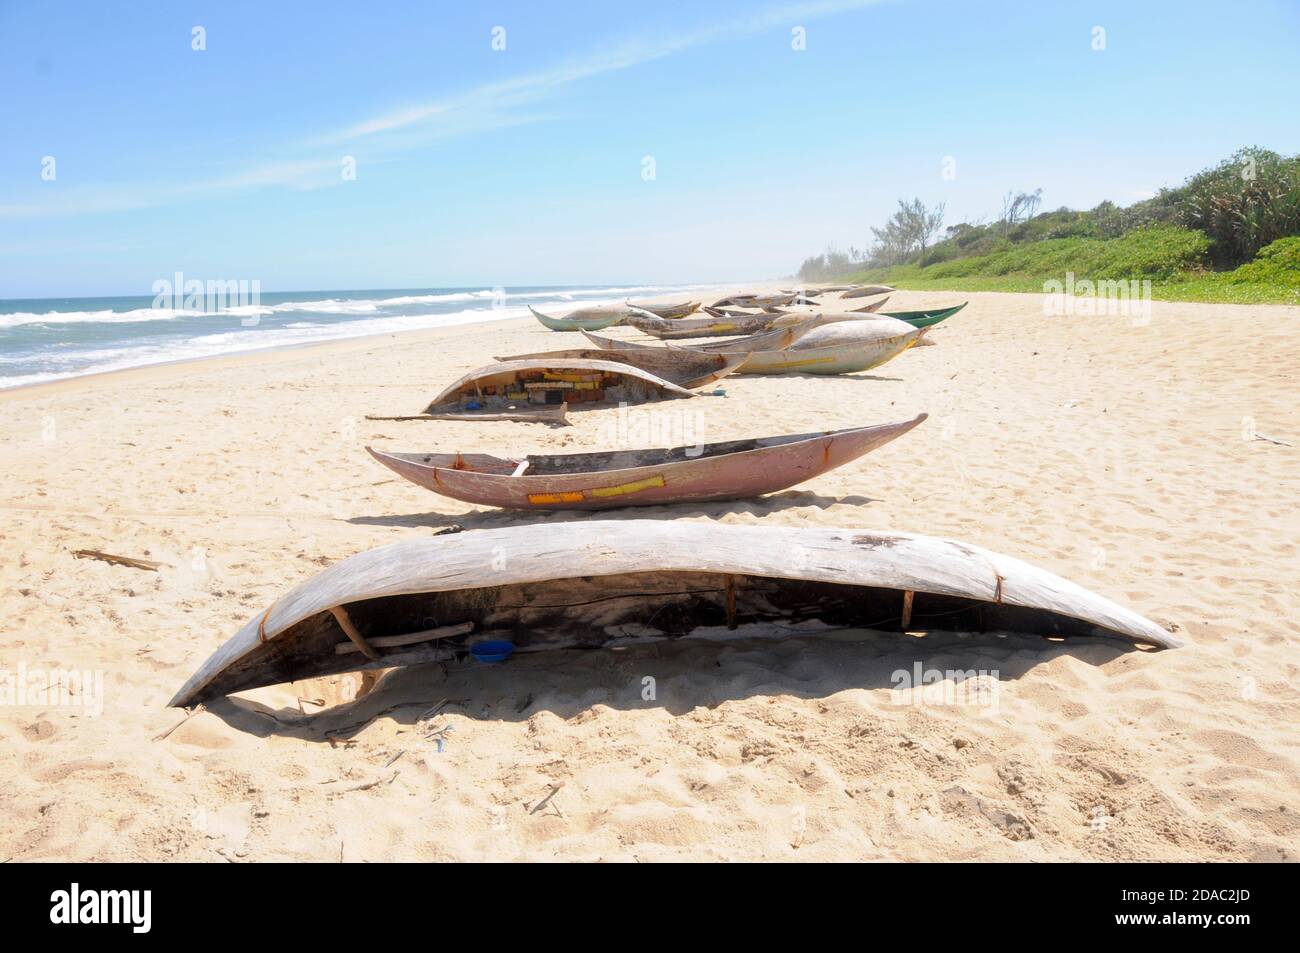 Dugout canoes on a beach in Madagascar Stock Photo